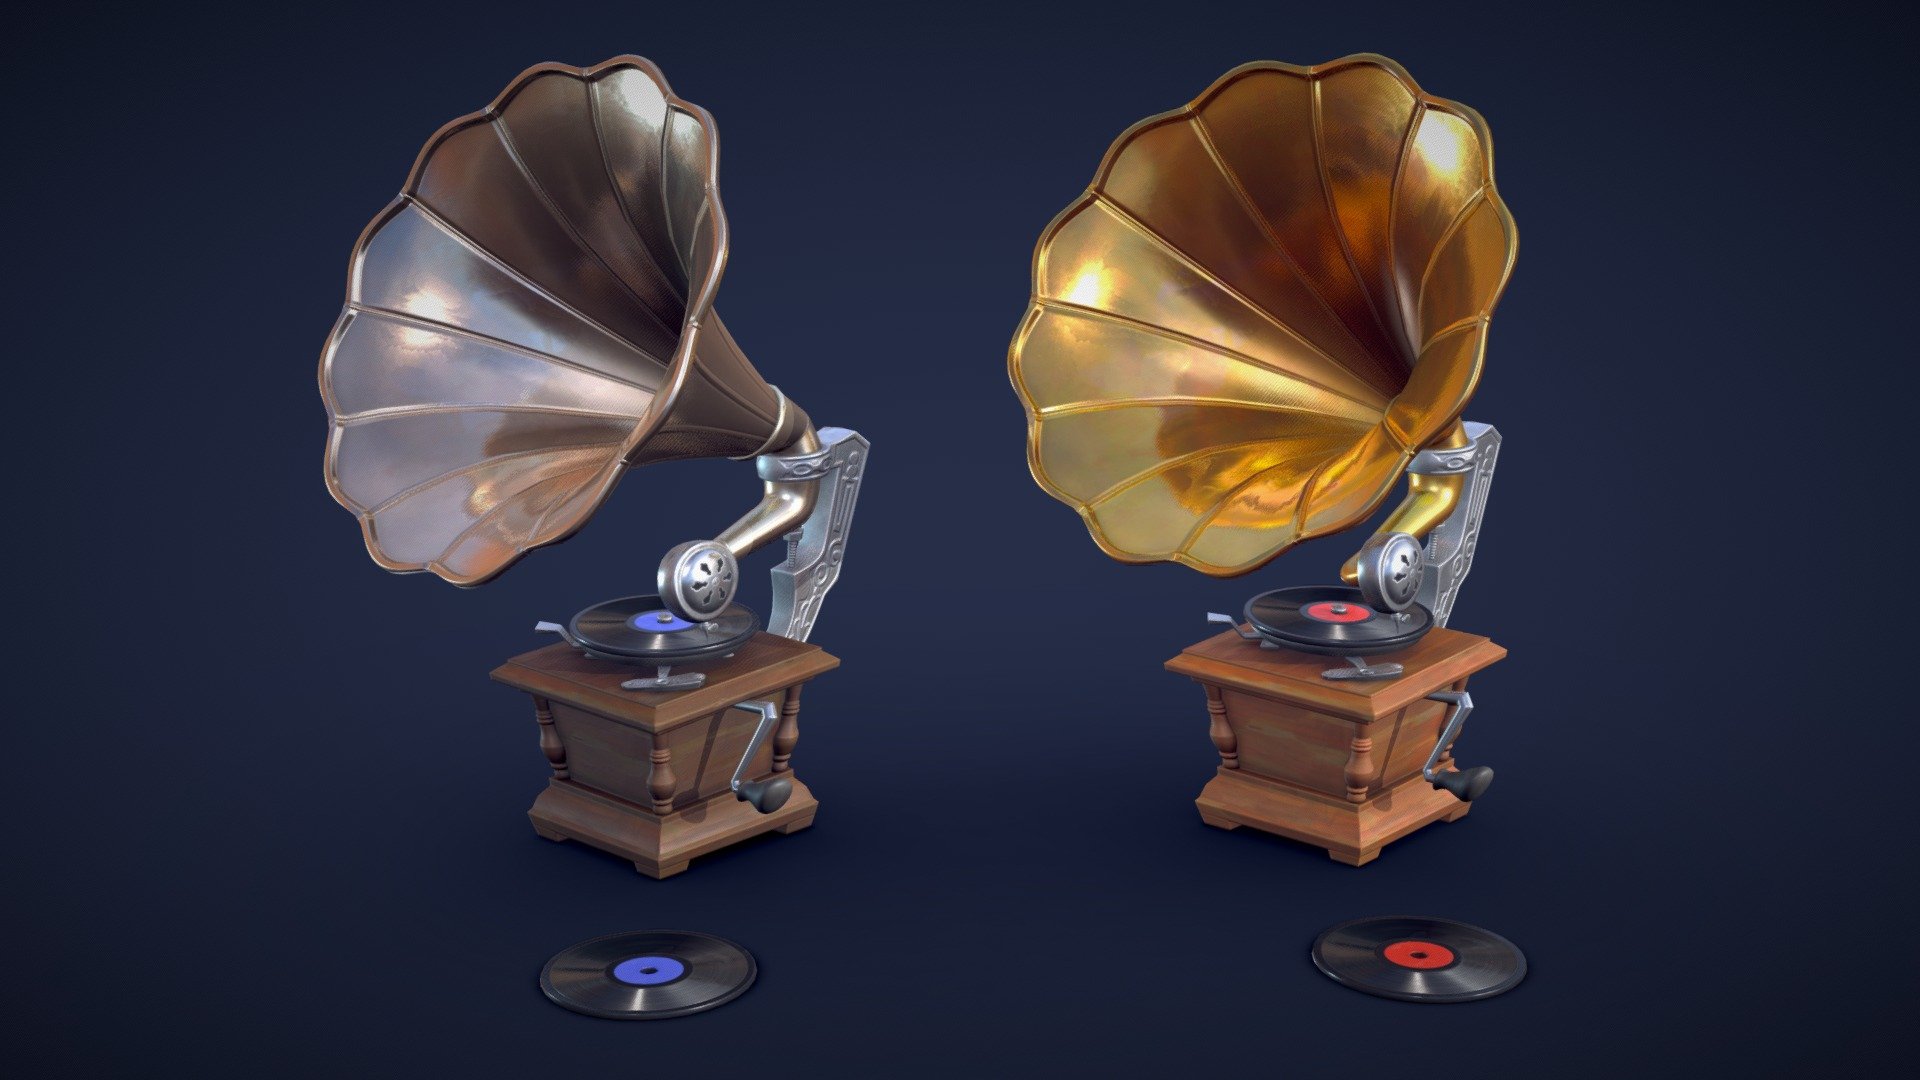 This is a stylized gramophone model that combines vintage charm with modern flair.
Whether you want to create a retro scene, a steampunk setting, or a musical theme, this stylized gramophone model will add some personality and detail to your project.

Model information:




Optimized low-poly assets for real-time usage.

2K and 4K textures for the assets are included.

Additional record mesh is included.

Additional unposed gramophone is included.

2 color variation textures are included (gold and silver).

Optimized and clean UV mapping.

Compatible with Unreal Engine, Unity and similar engines.

All assets are included in a separate file as well.

Here is a look at the assets included in this pack:
 - Stylized Gramophone - Low Poly - Buy Royalty Free 3D model by Lars Korden (@Lark.Art) 3d model